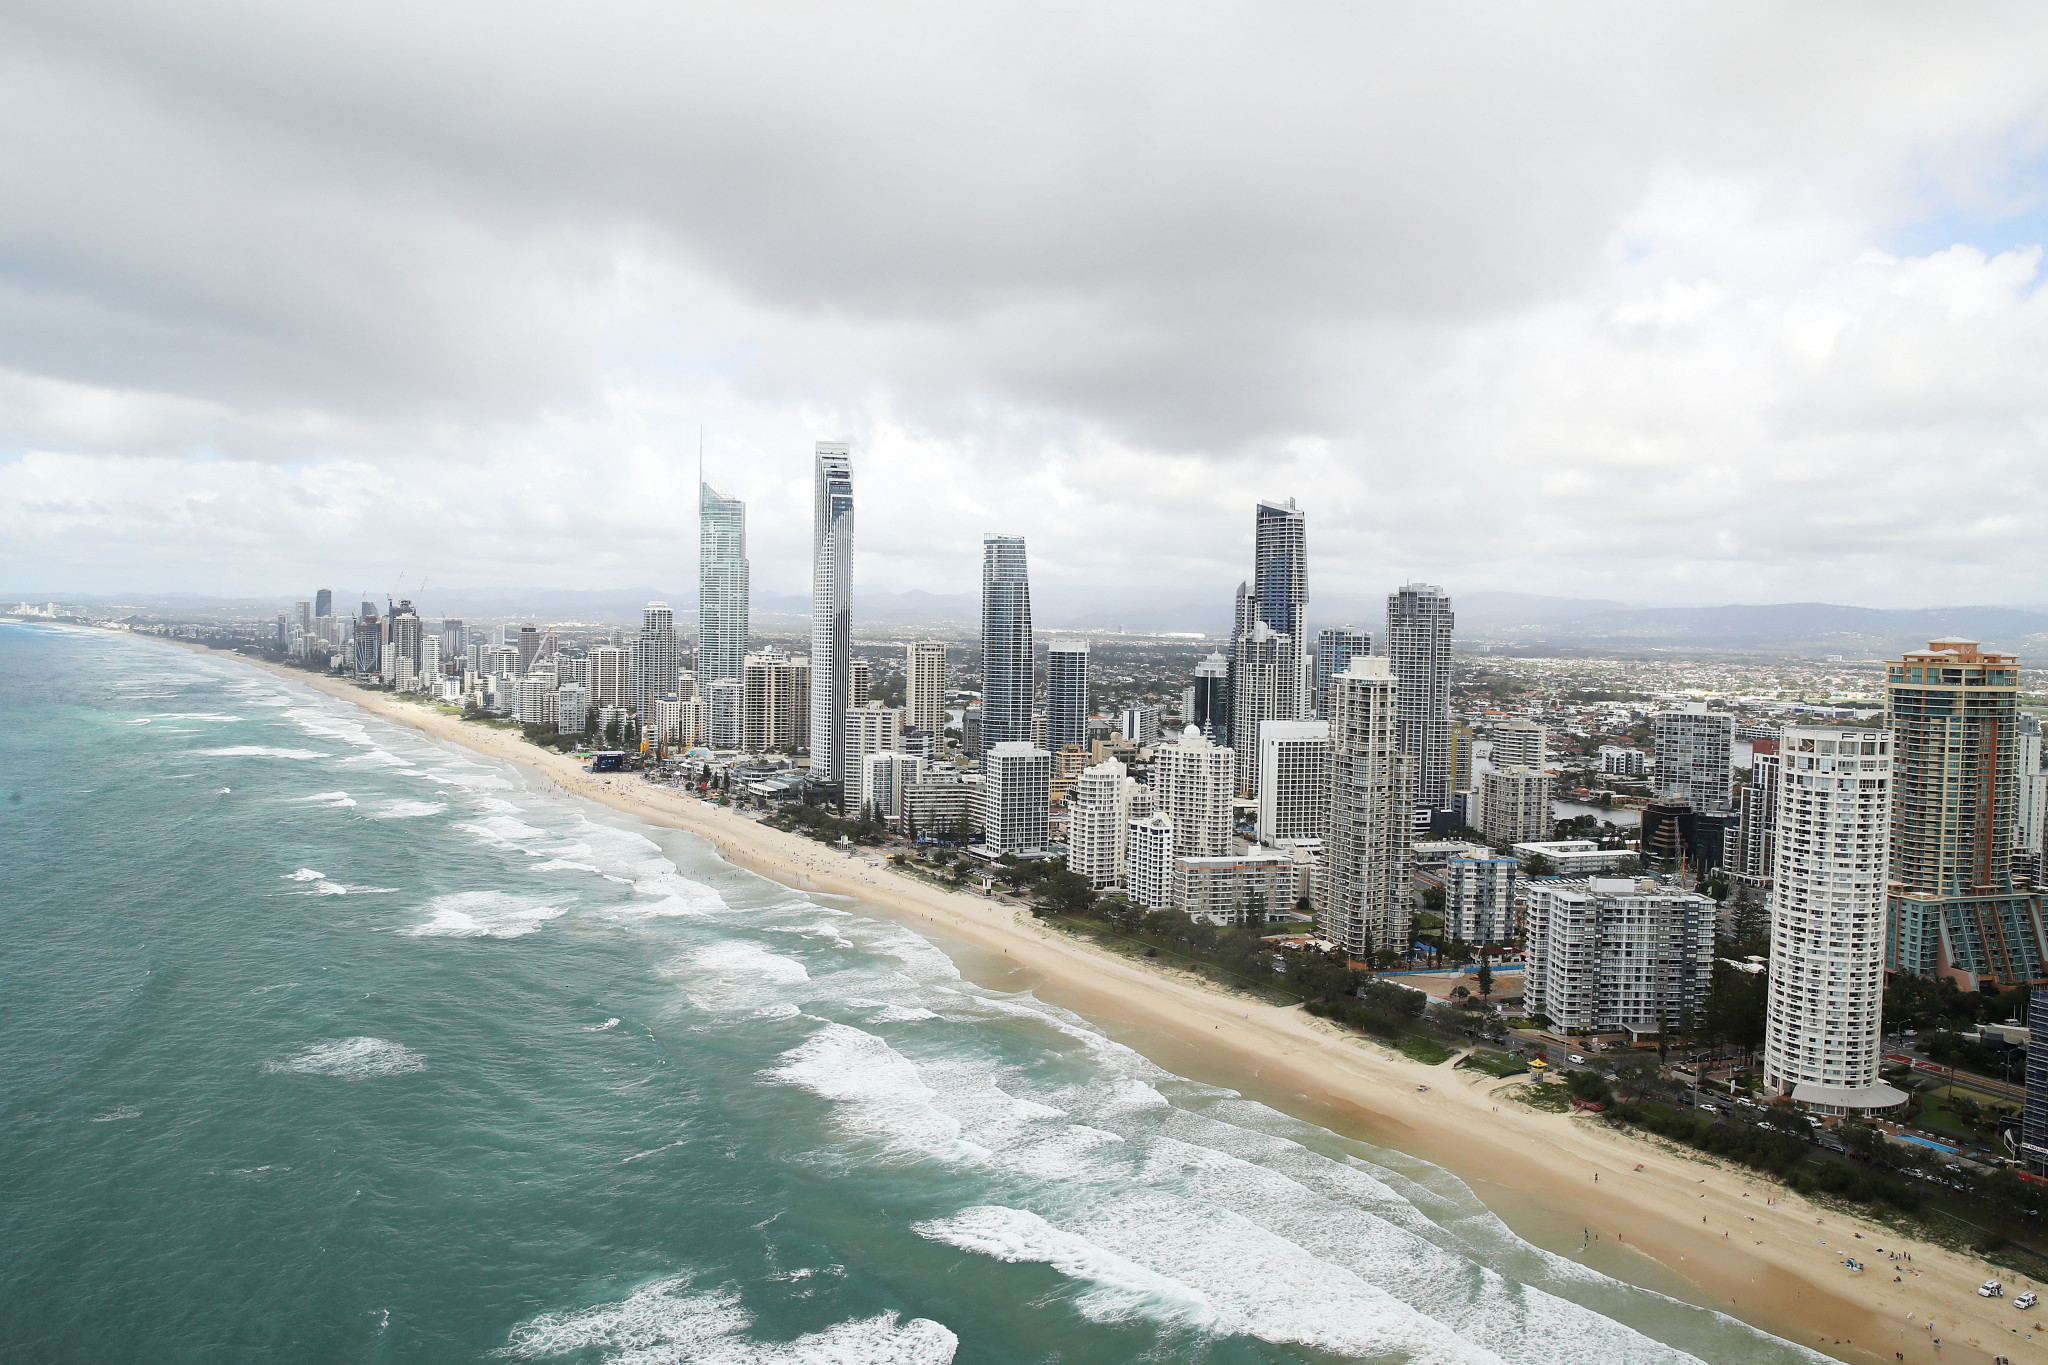 Gold Coast officials claim economic boost after hosting 2018 Commonwealth Games